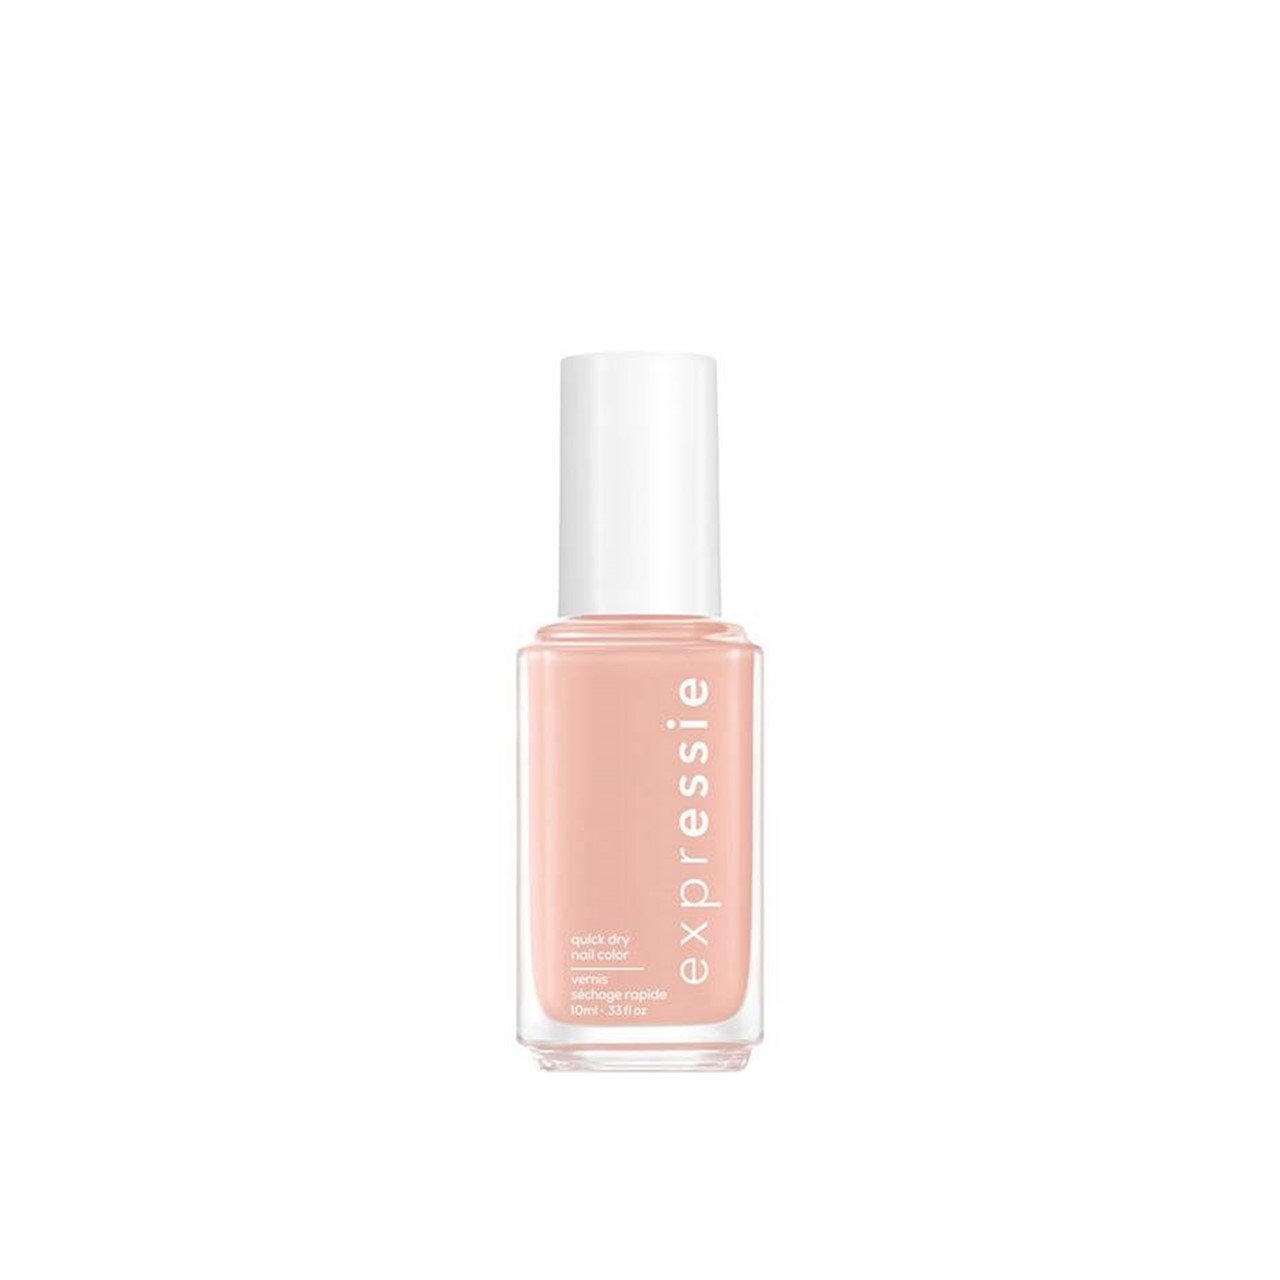 Essie Expressie Quick Dry Nail Polish 0 Crop Top And Roll 10ml